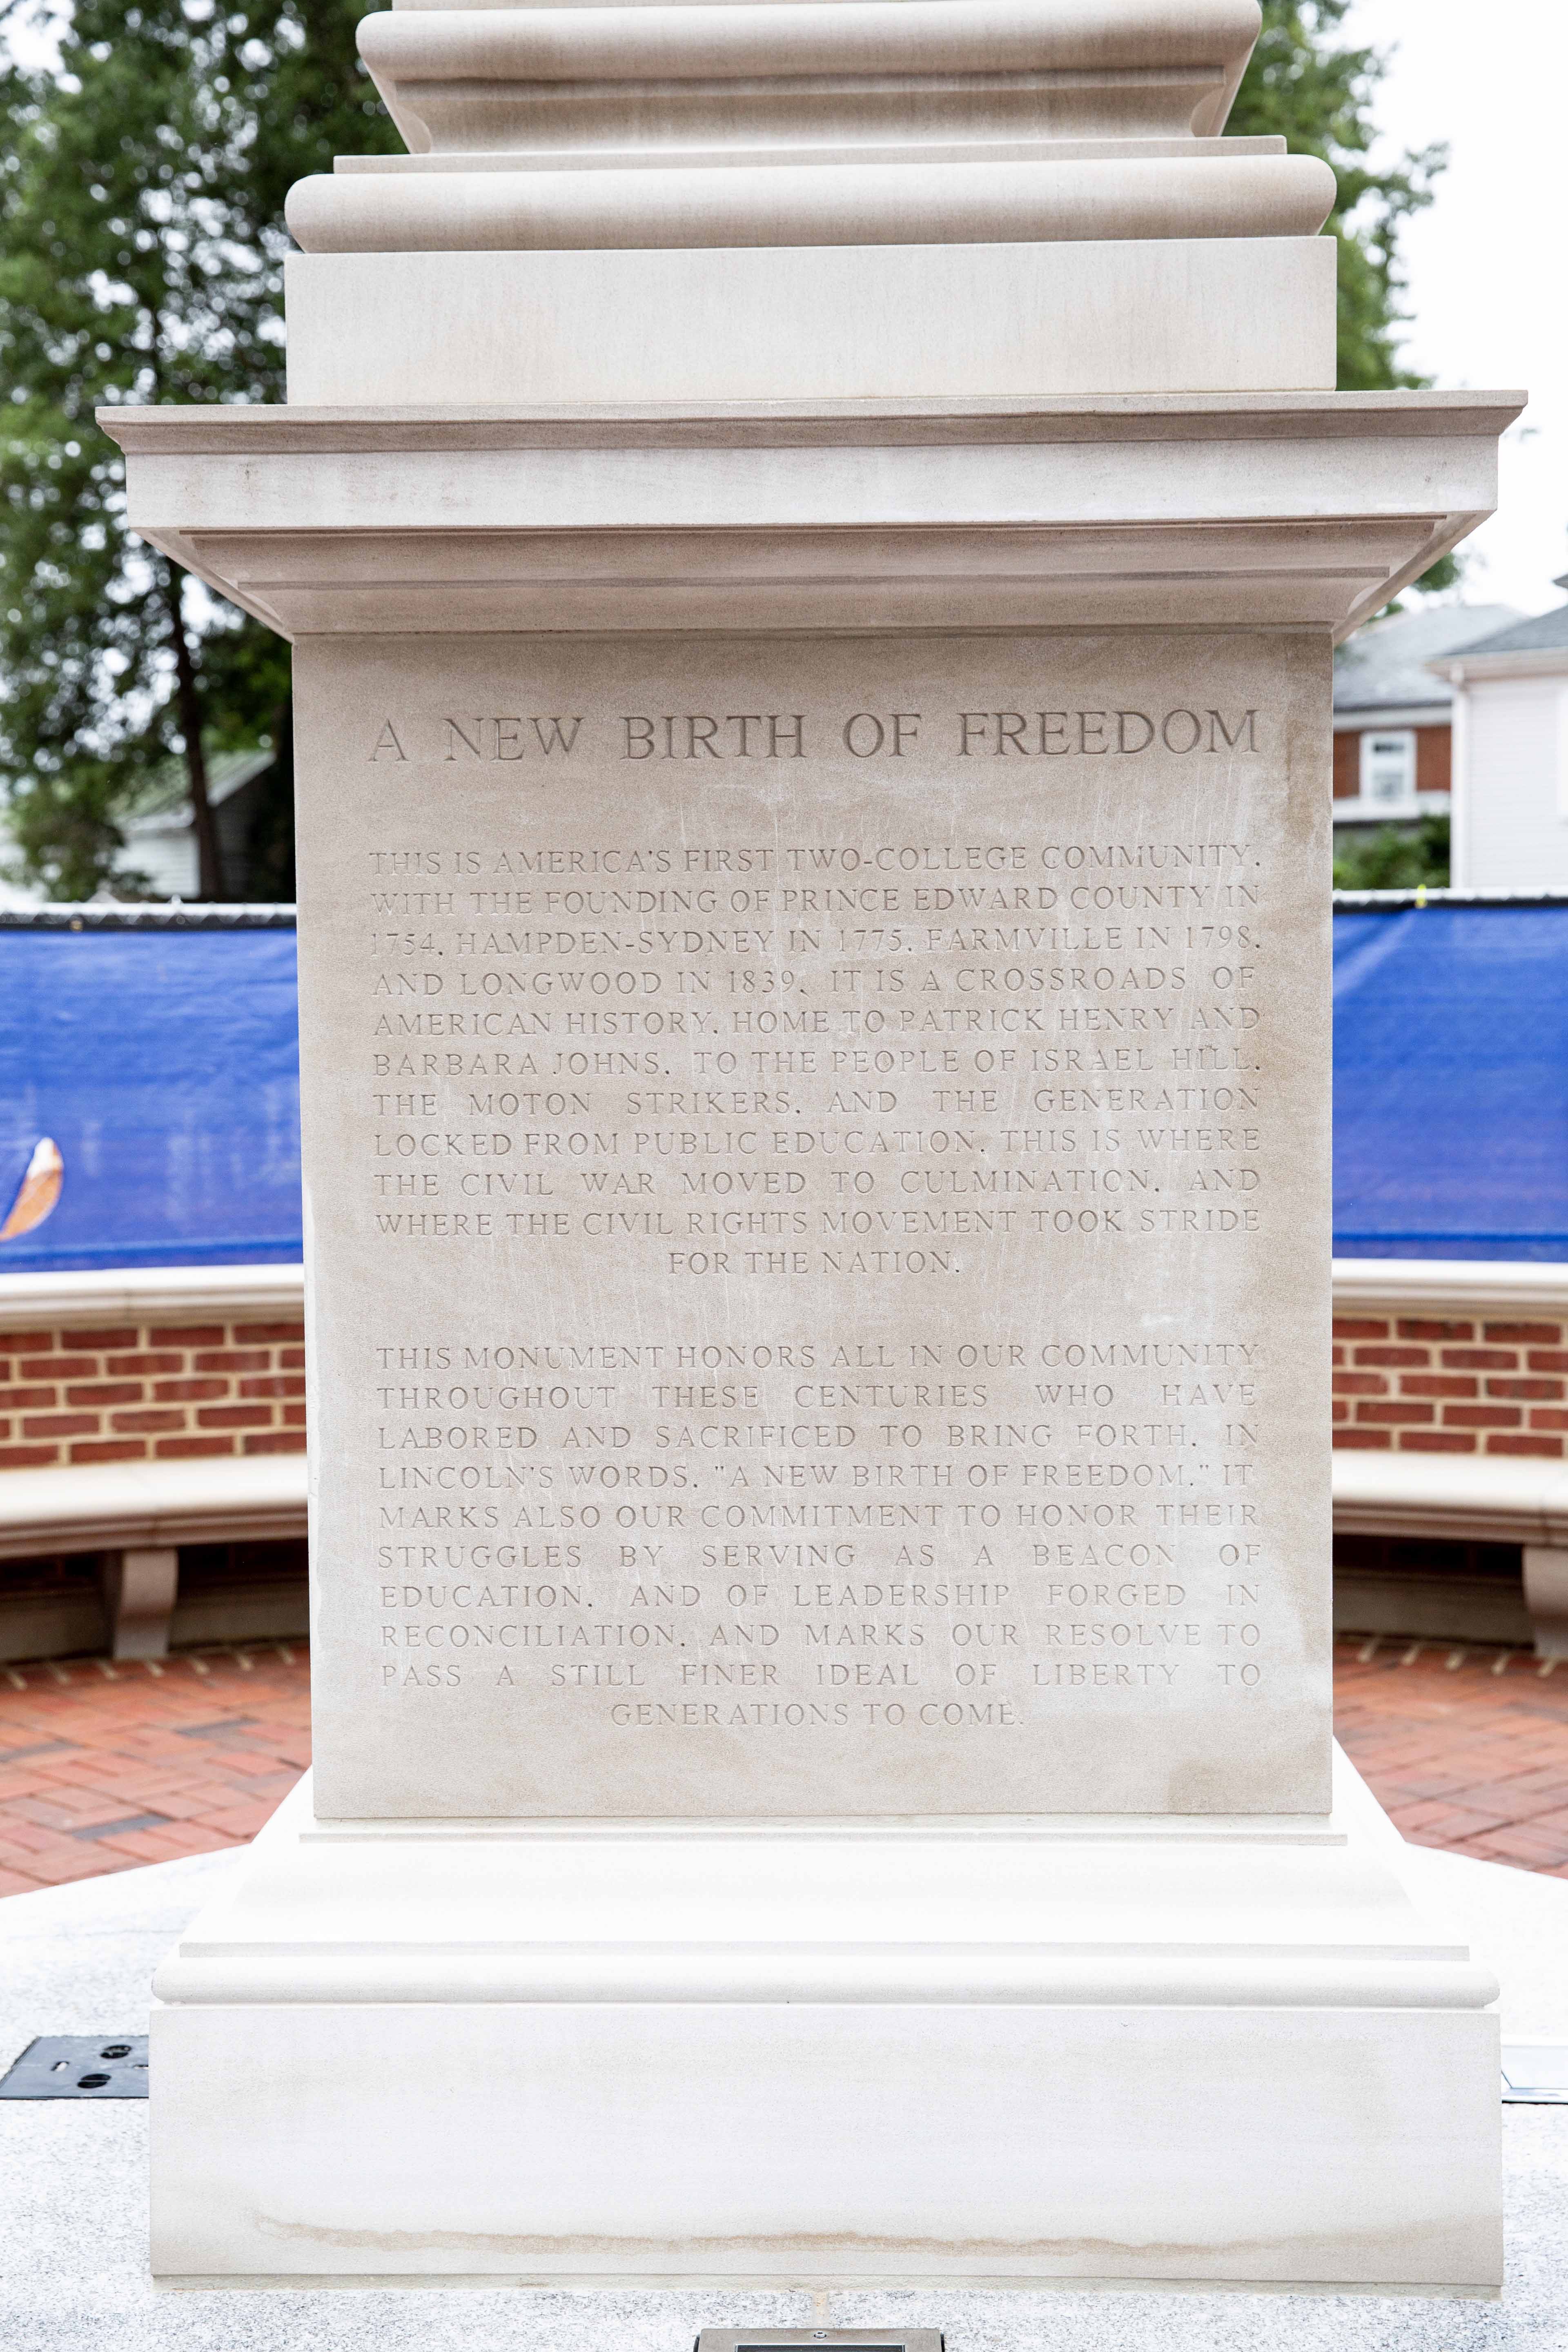 An image of the inscription on the freedom monument